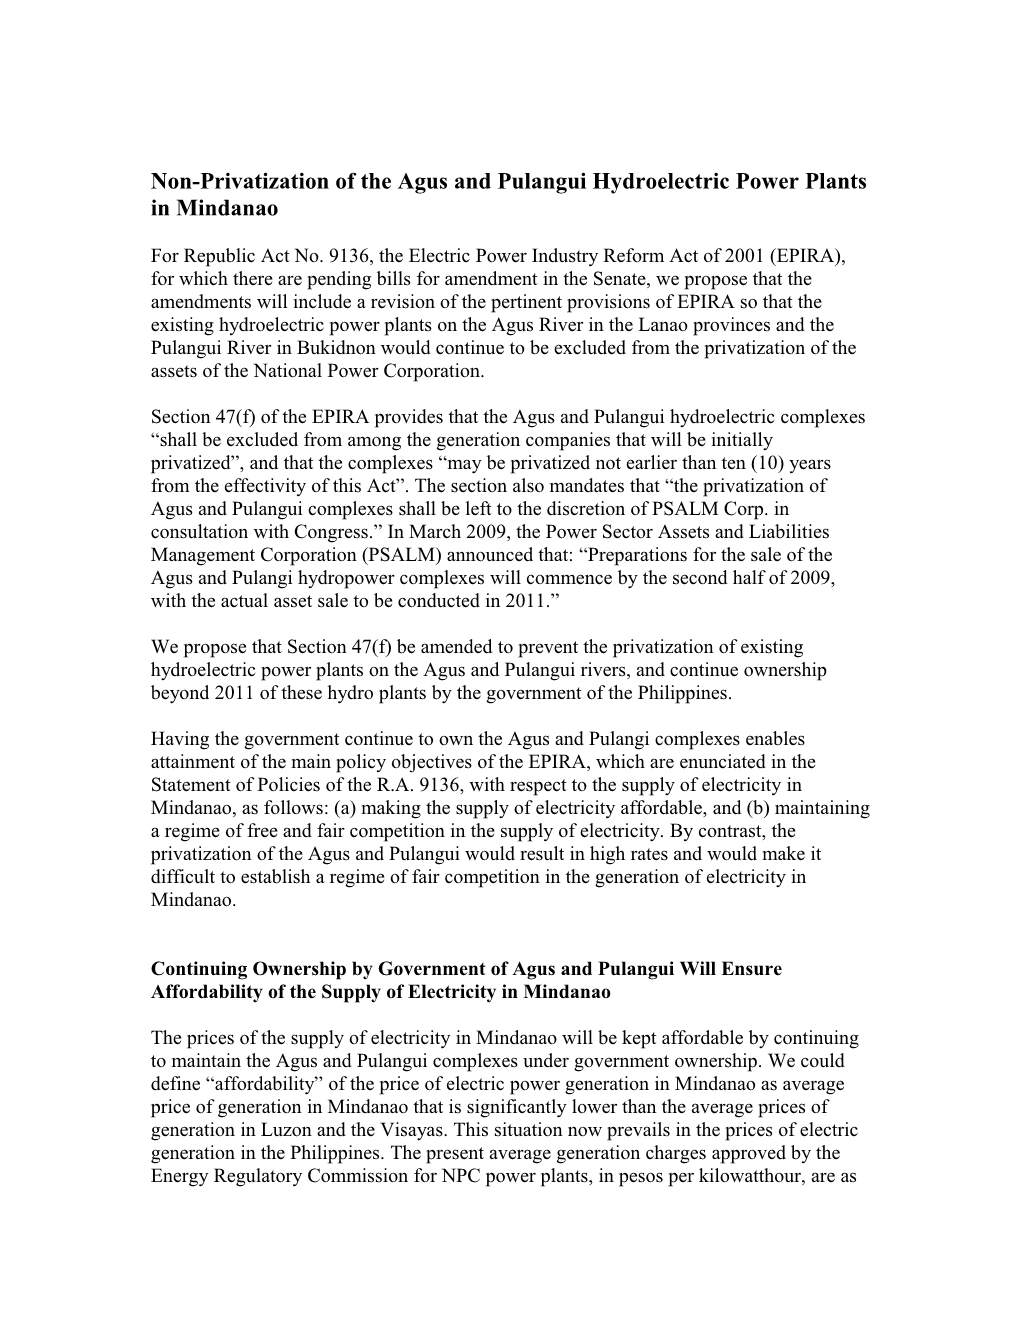 Non-Privatization of the Agus and Pulangui Hydroelectric Power Plants in Mindanao